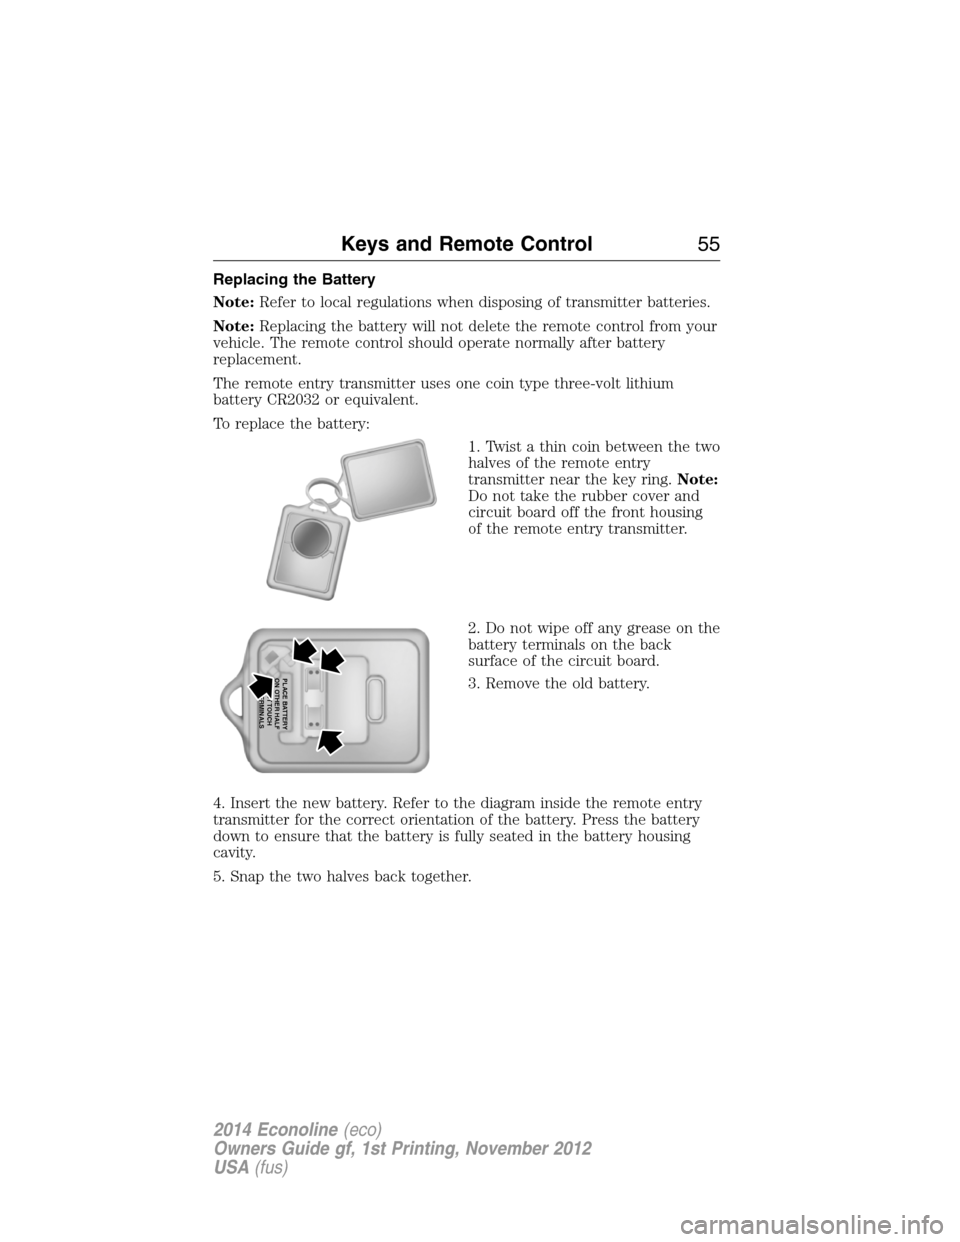 FORD E SERIES 2014 4.G Owners Manual Replacing the Battery
Note:Refer to local regulations when disposing of transmitter batteries.
Note:Replacing the battery will not delete the remote control from your
vehicle. The remote control shoul